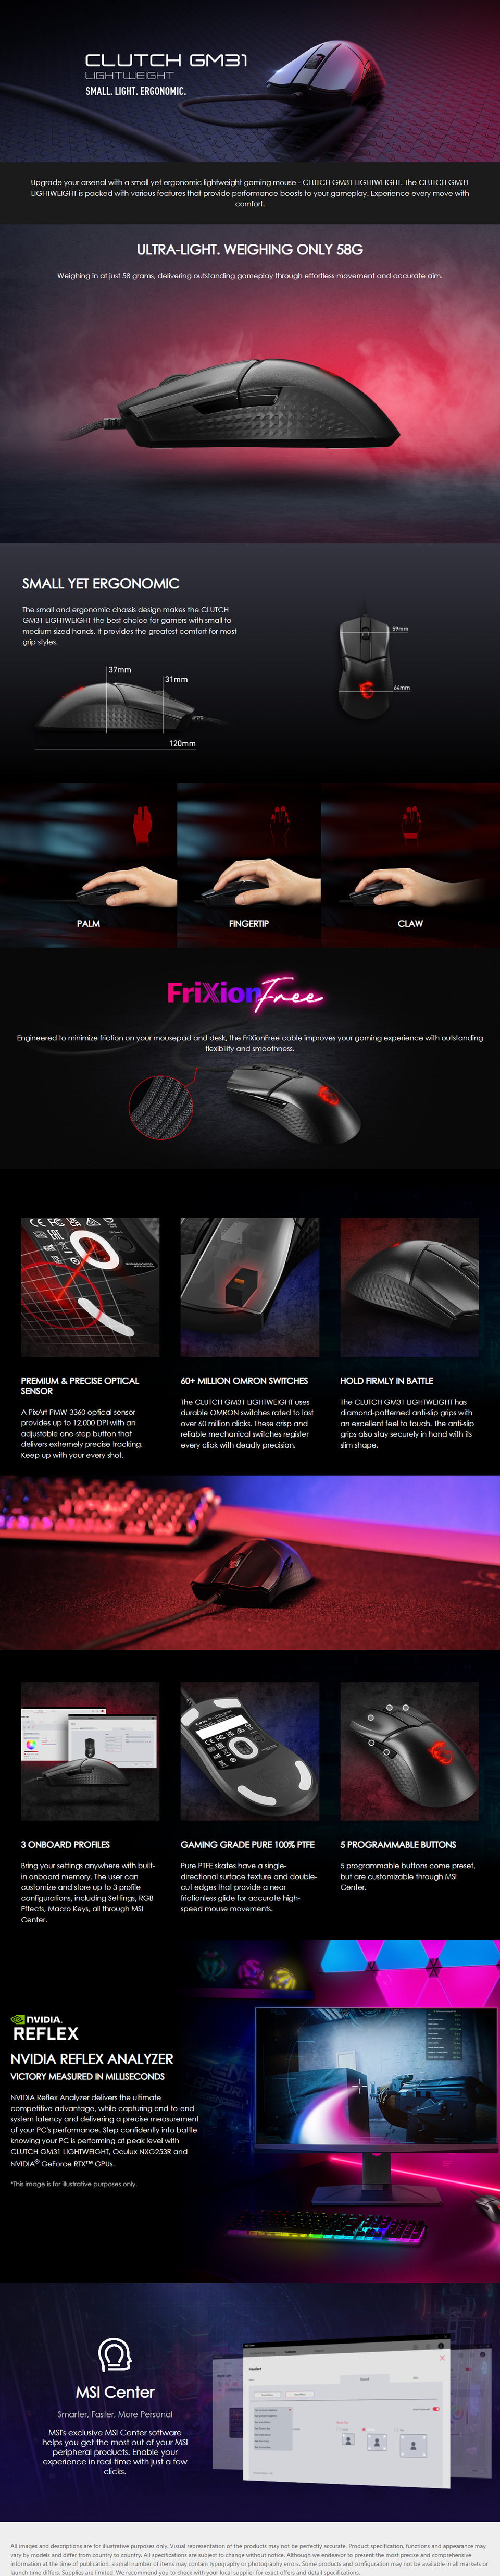 msi clutch gm31 lightweight gaming mouse